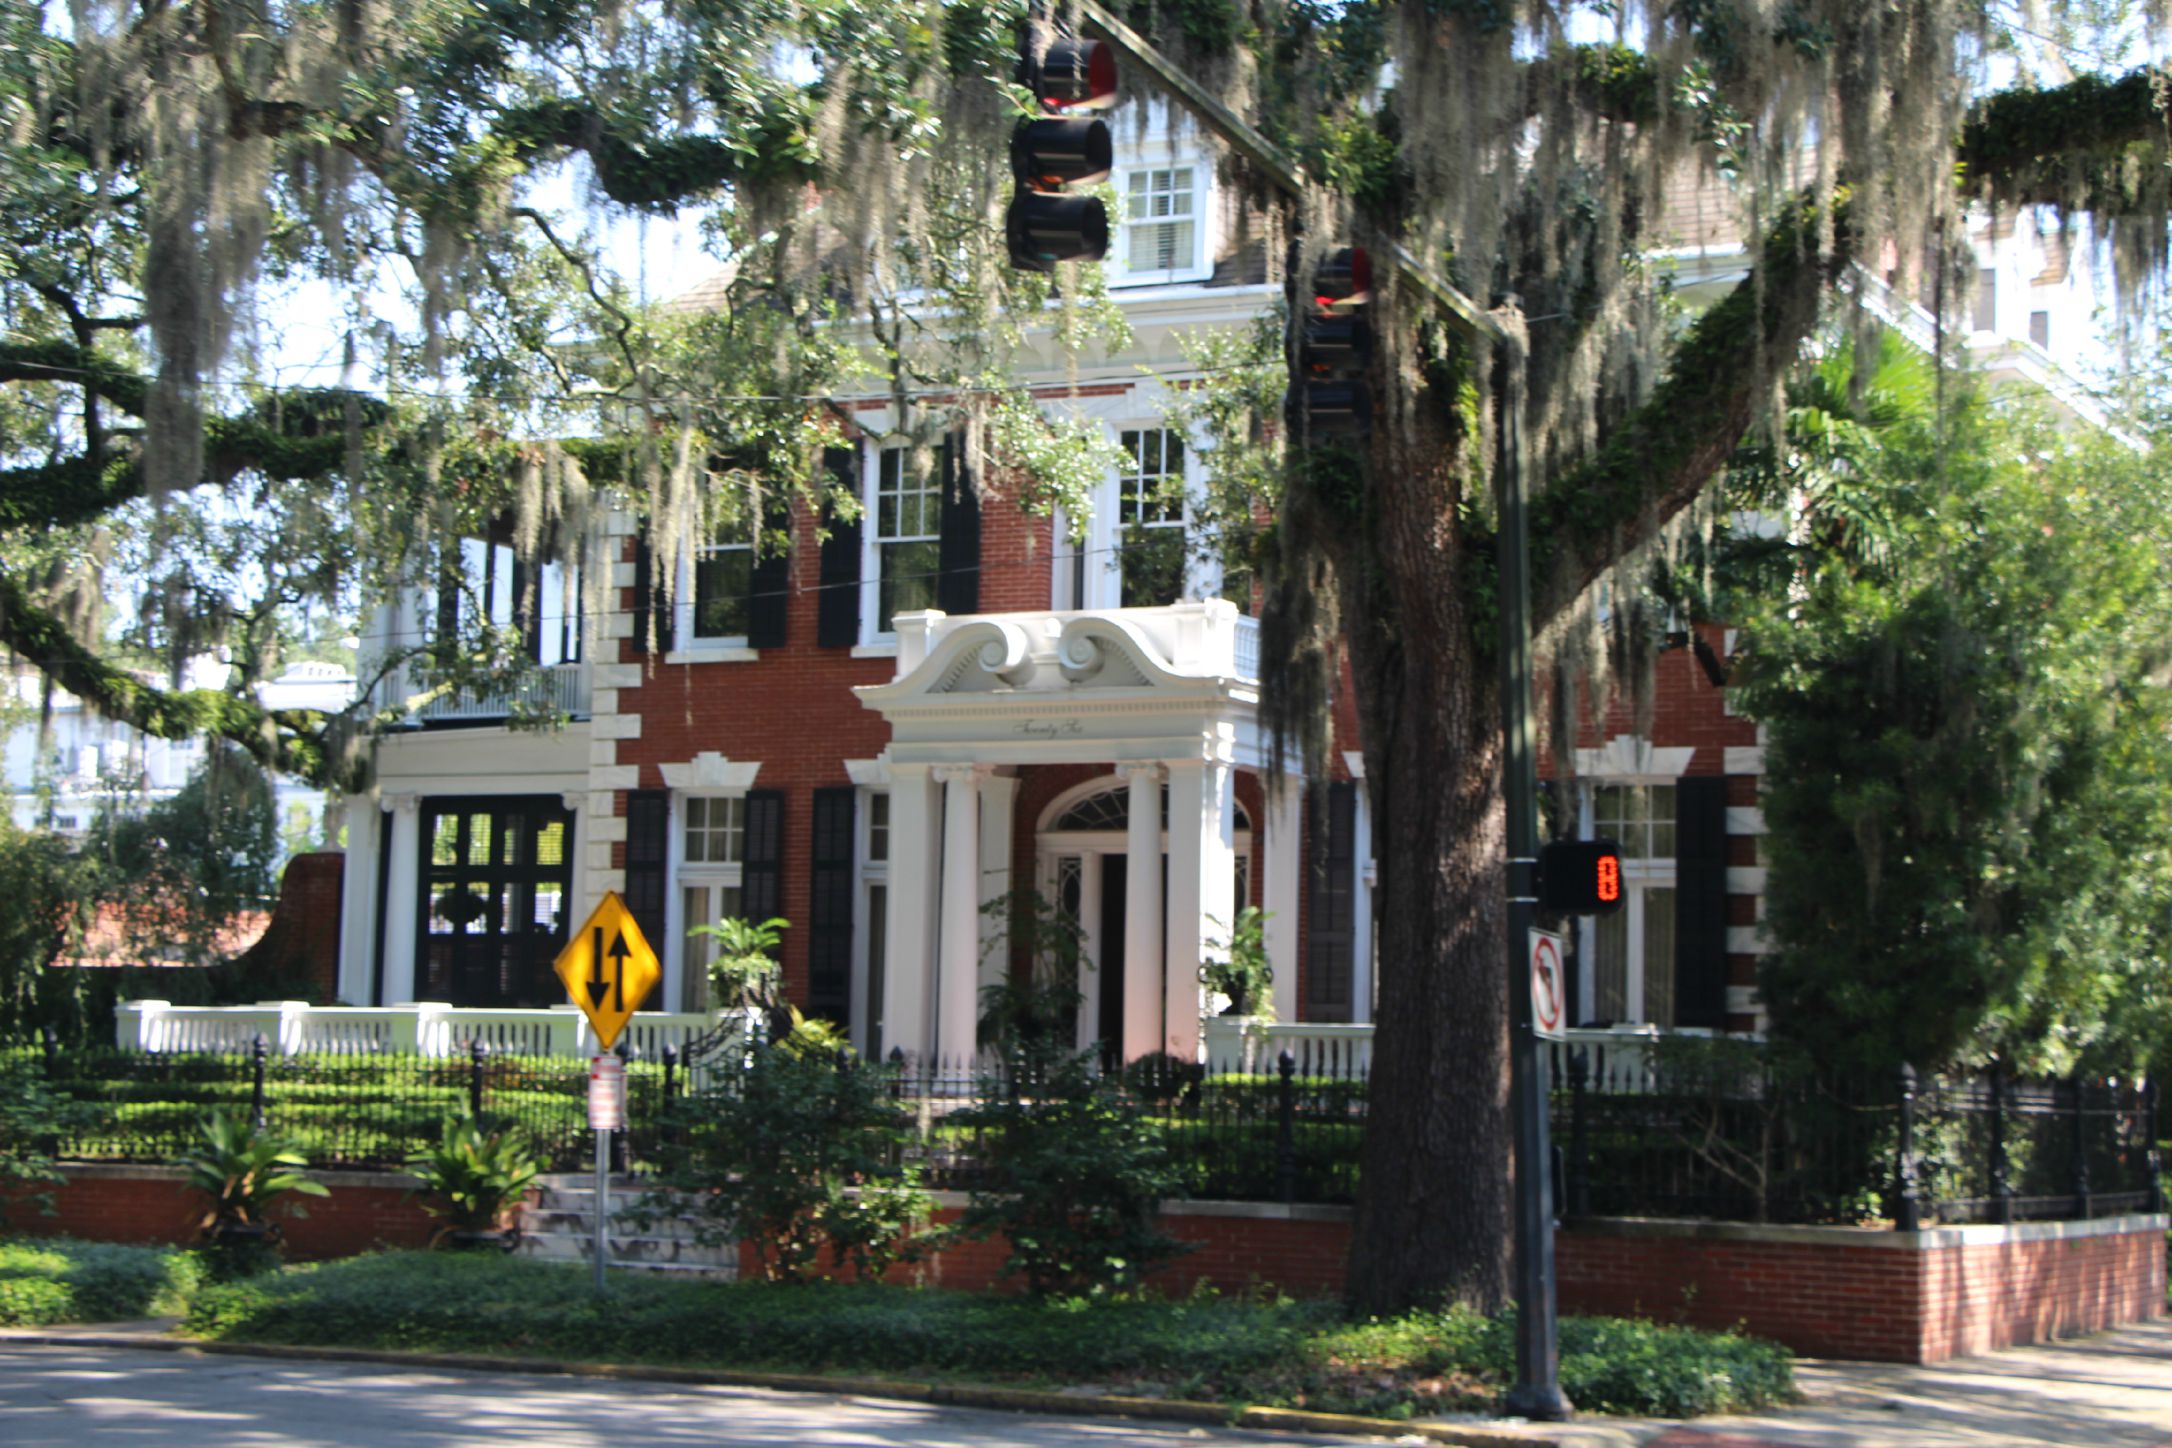 Old Mansion - Beautiful Historic District - Savannah Georgia - This is our Bliss